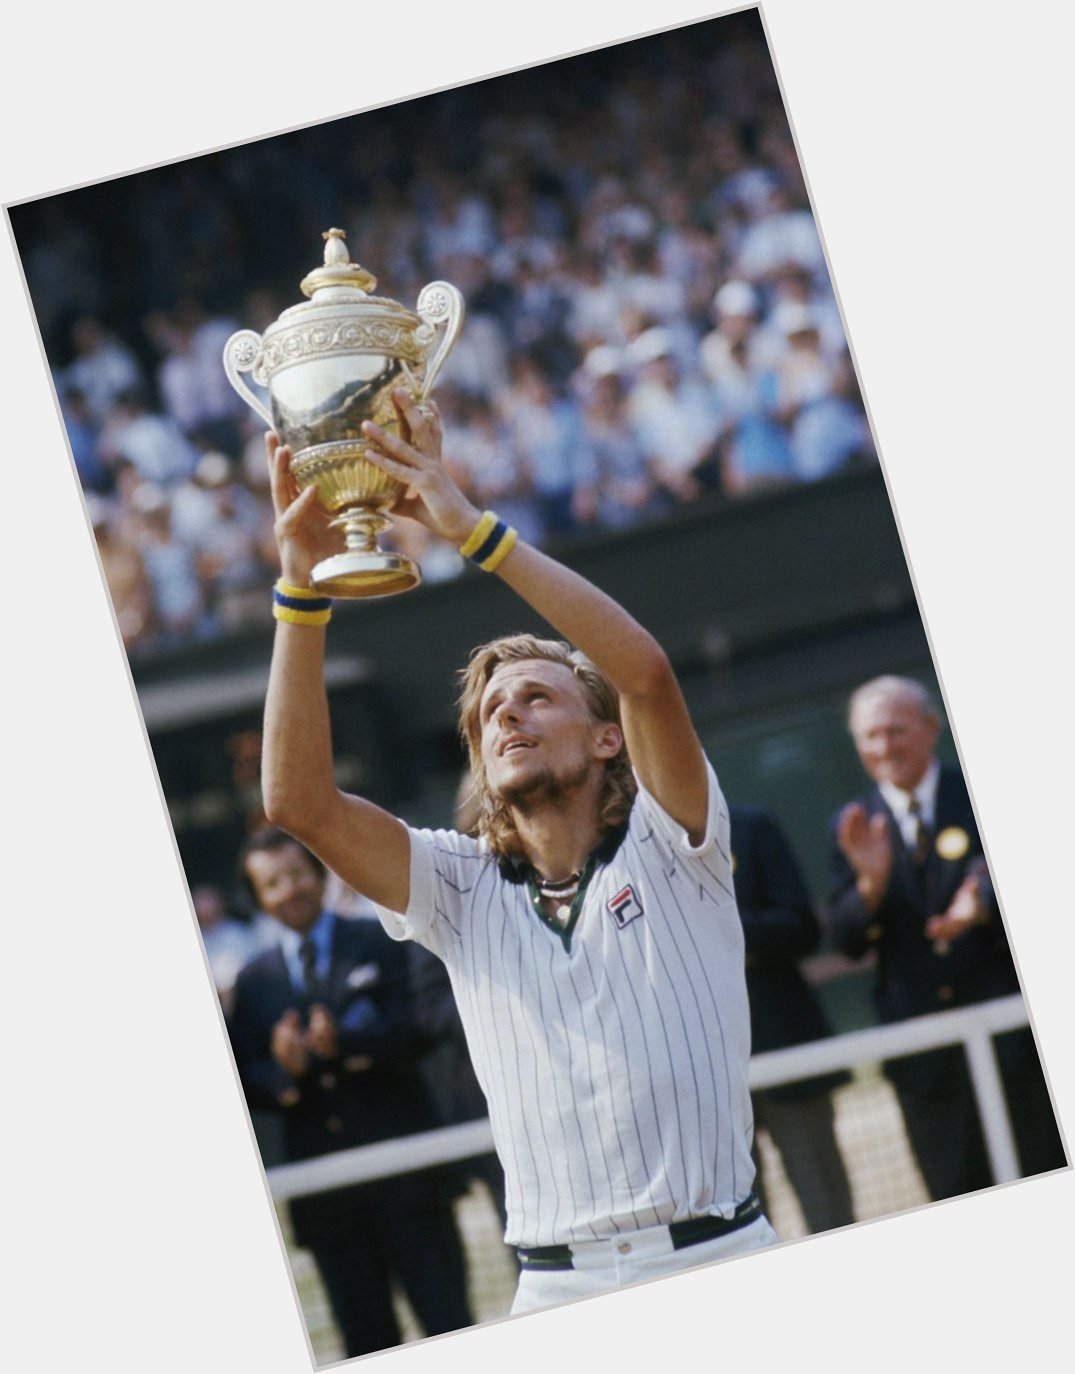 Happy birthday to a legend of our sport, Bjorn Borg. Have a wonderful day. 